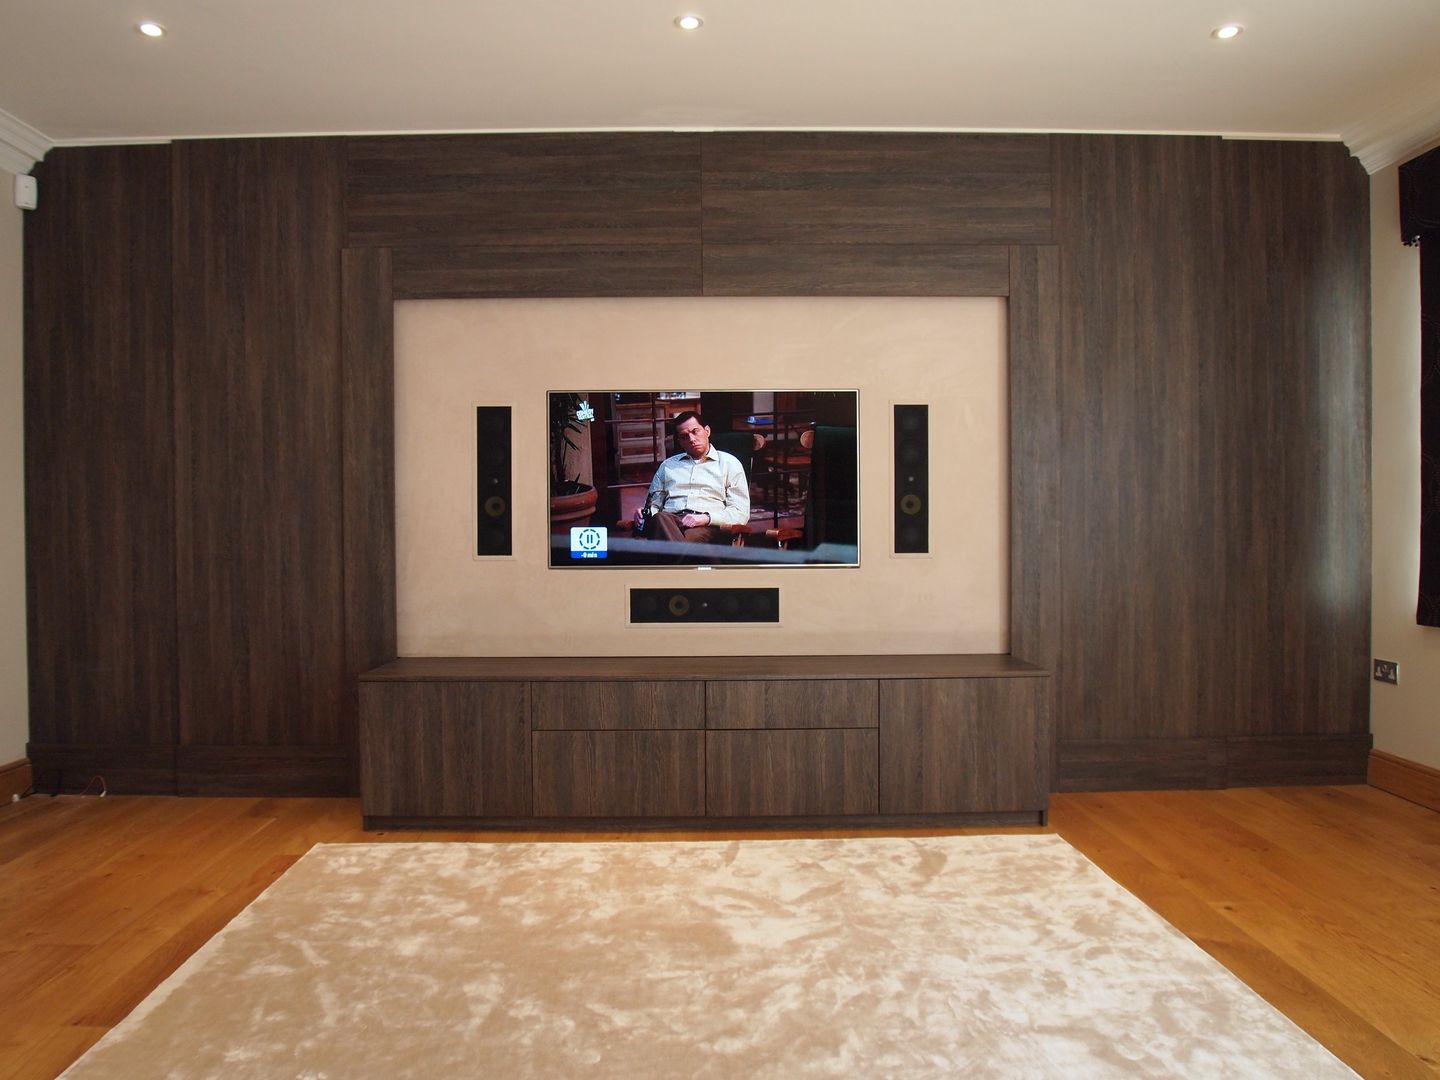 Dual purpose audio visual media unit with concealed 9 feet cinema screen and wood panelled walls. Designer Vision and Sound: Bespoke Cabinet Making Moderne mediakamers Meubels